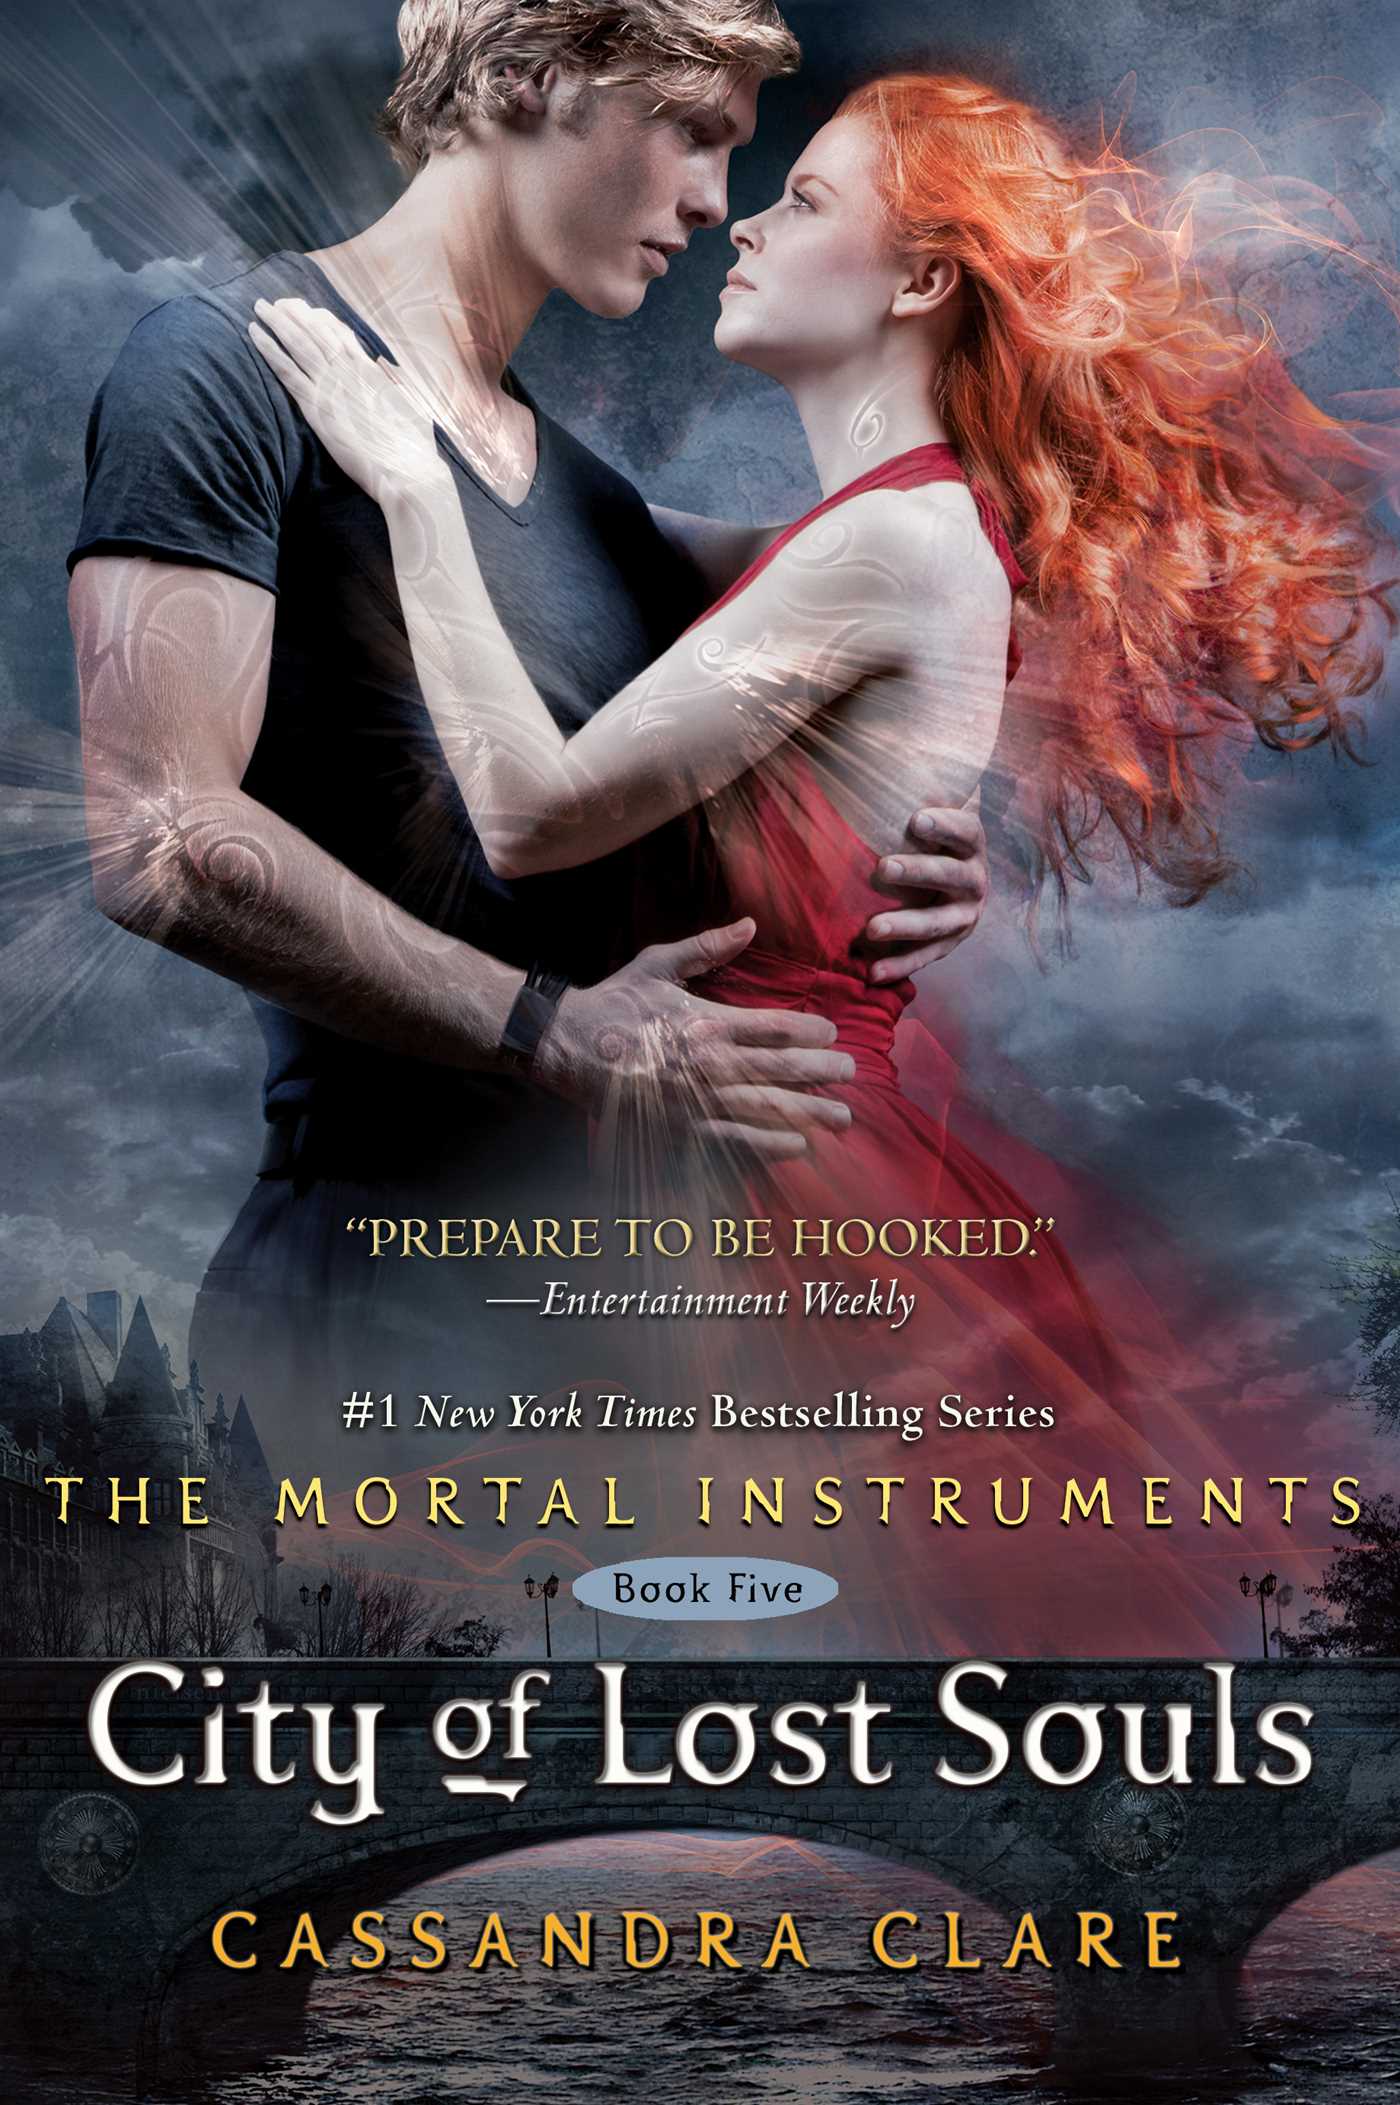 The Mortal Instruments: City of Lost Souls (Series #5) (Hardcover) - image 1 of 1